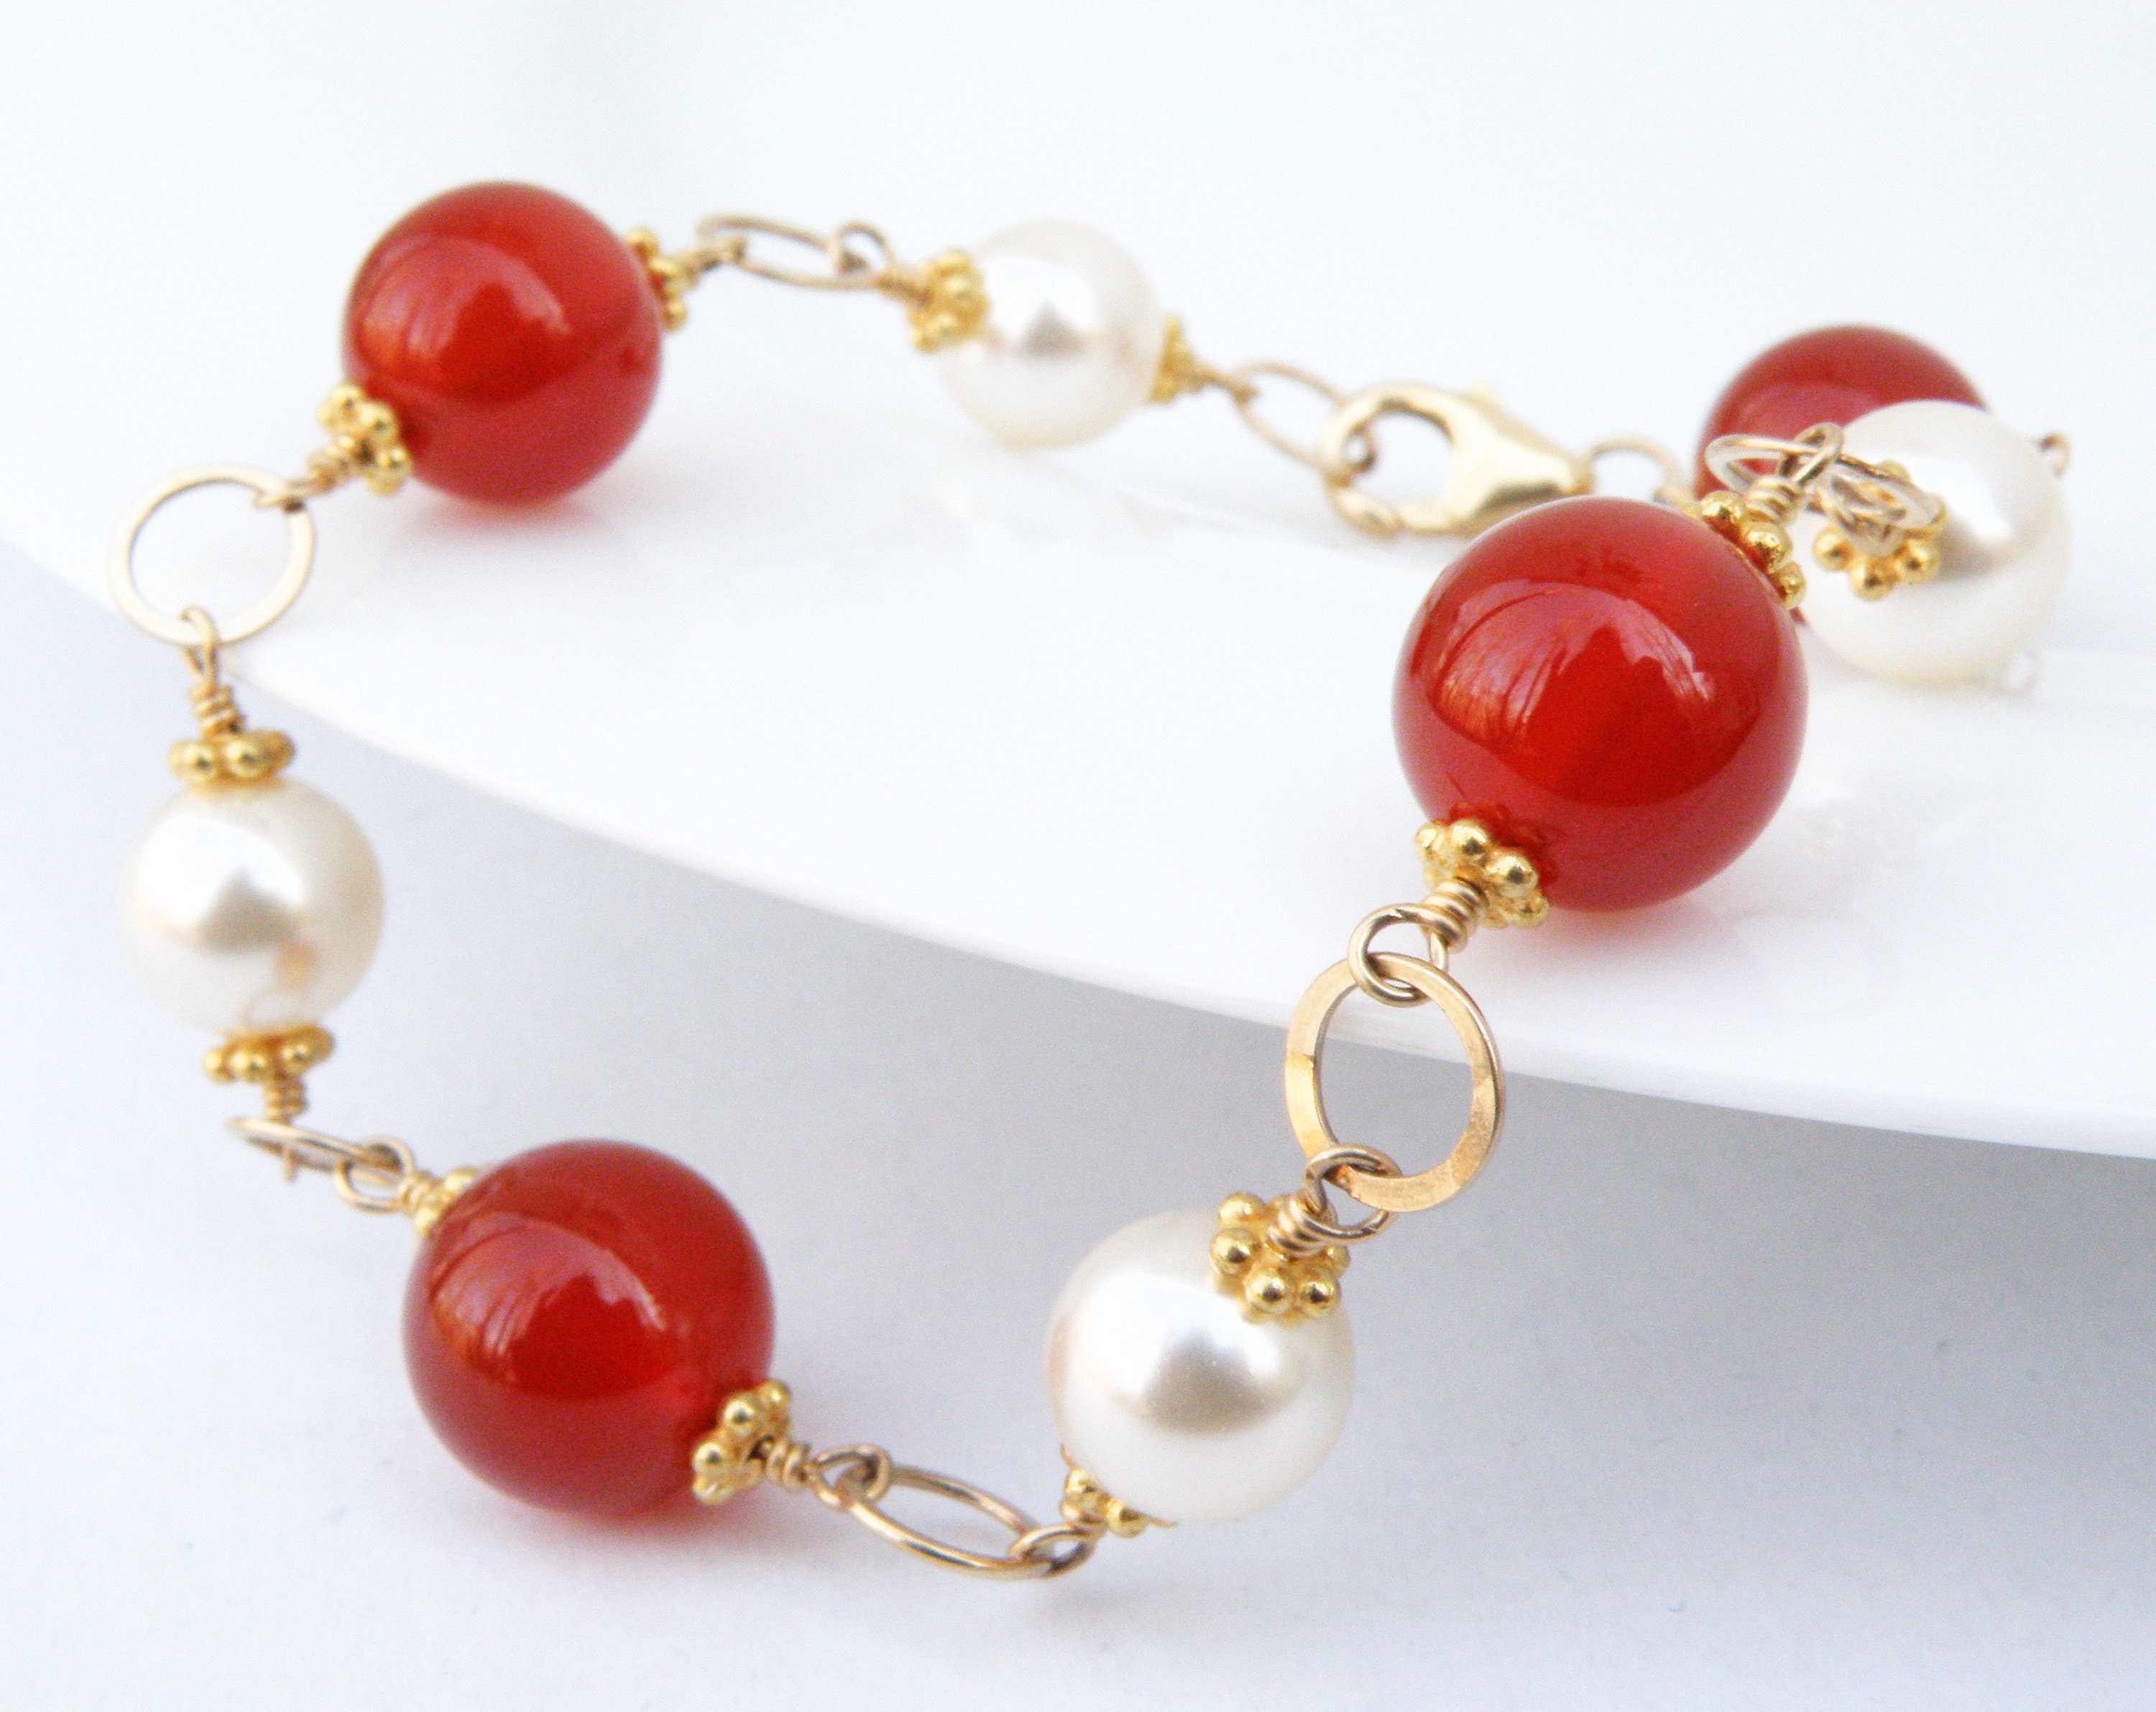 Carnelian and Pearl Bracelet Gold Filled or Sterling Silver - Etsy